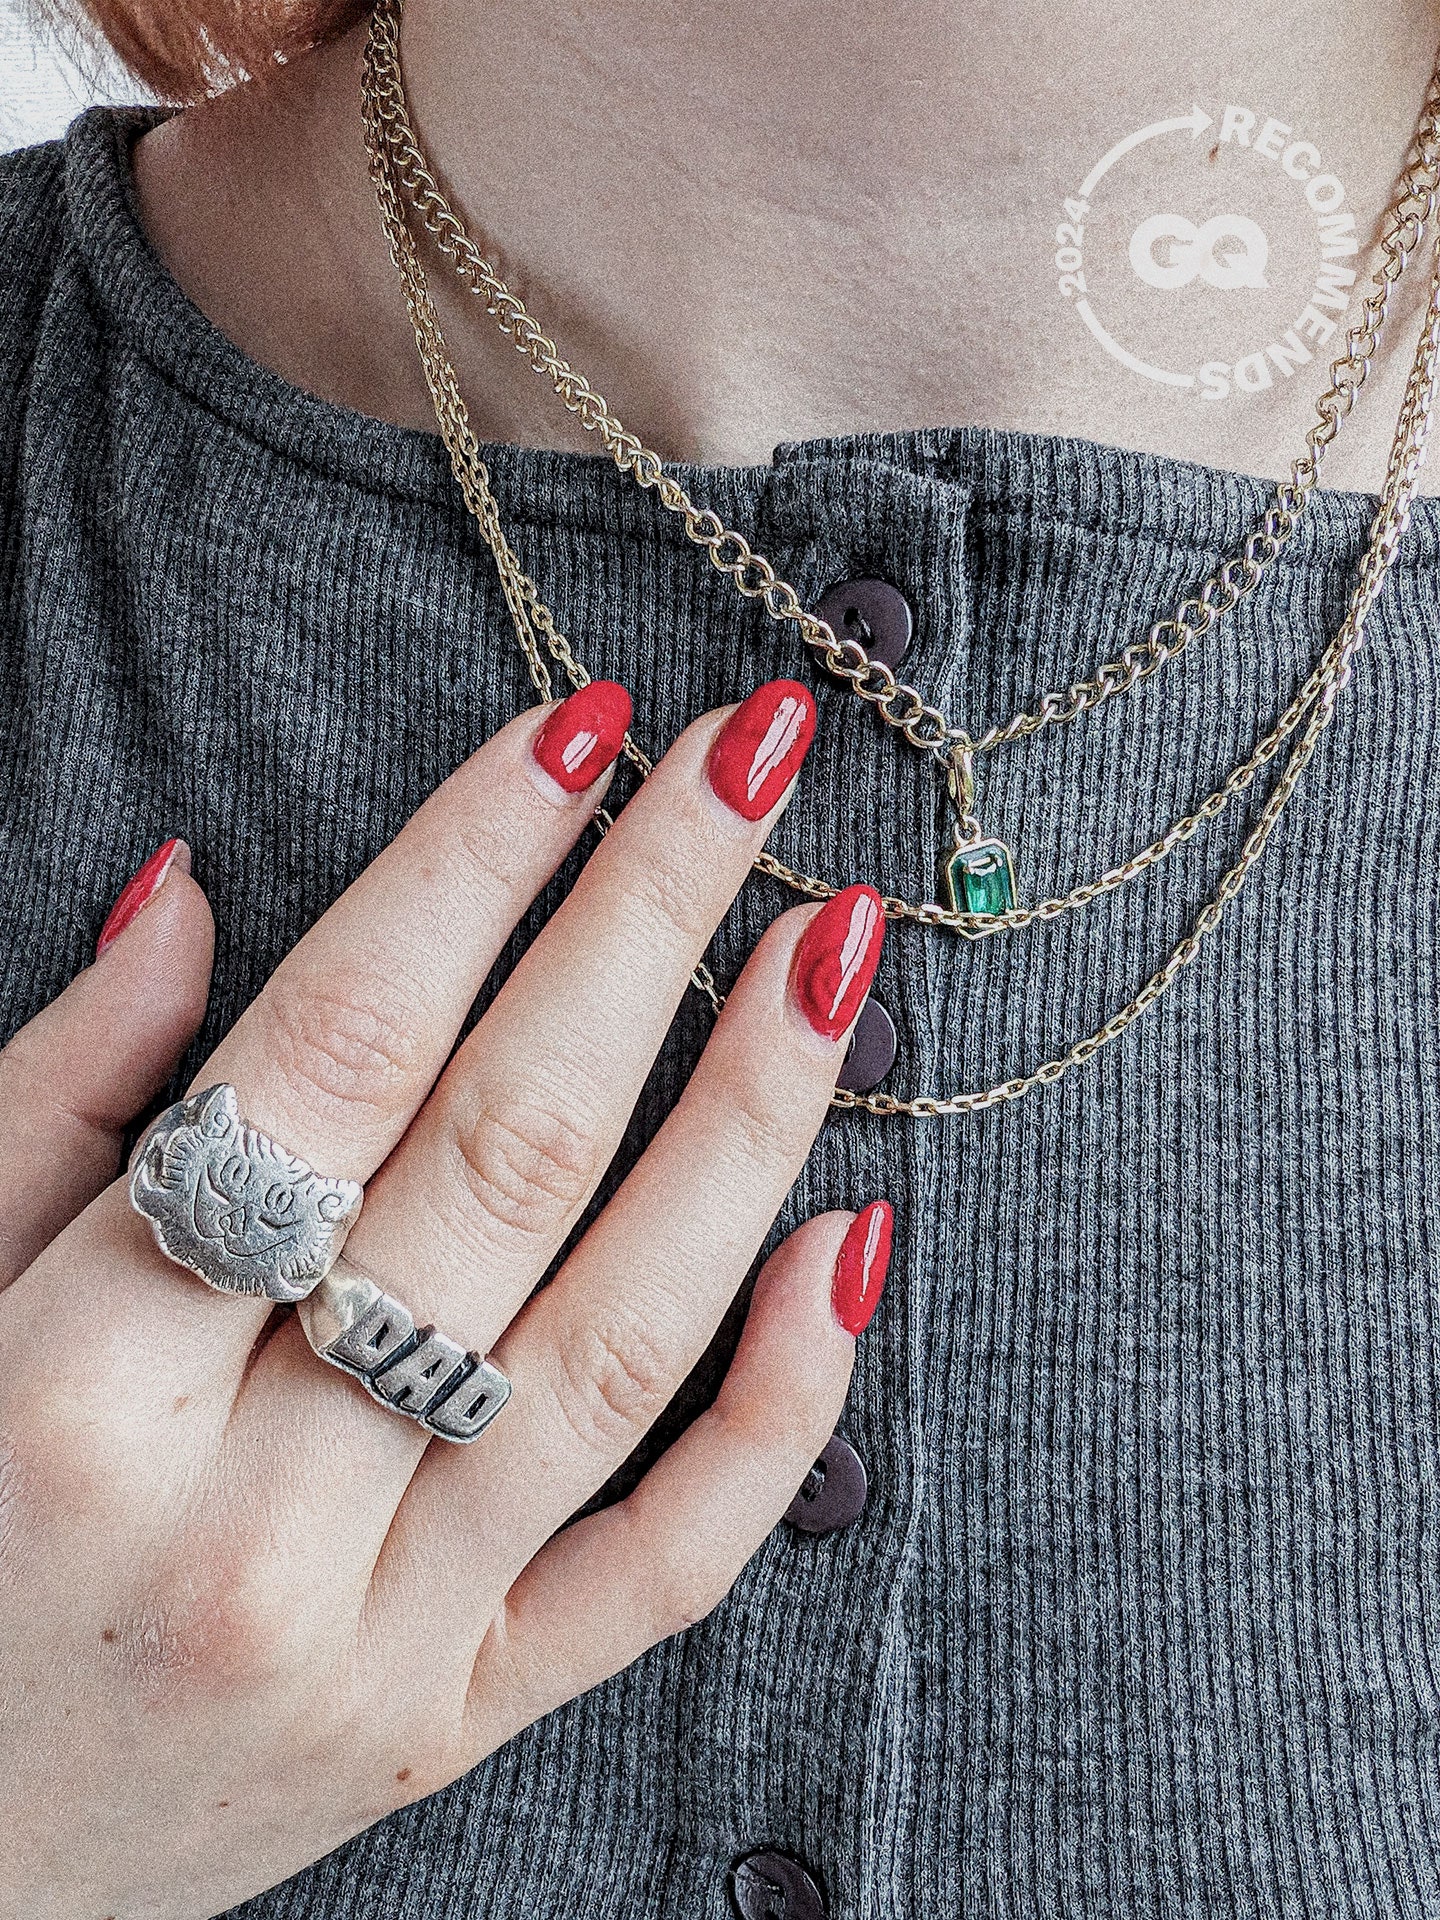 Image may contain Accessories Body Part Finger Hand Person Jewelry and Necklace